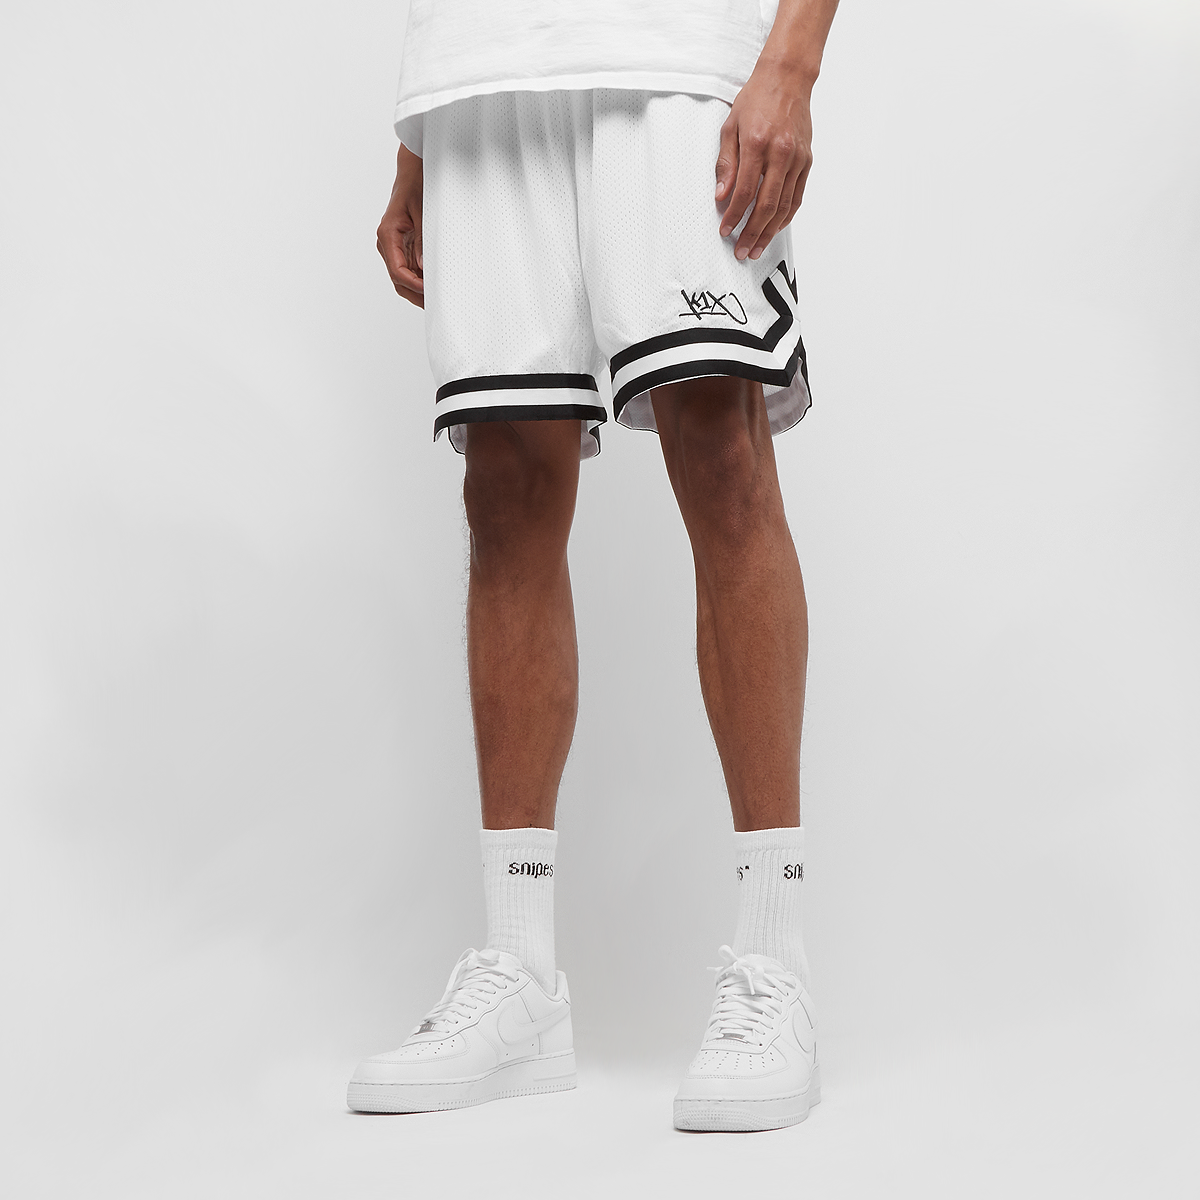 double-x shorts, k1x, apparel, white, taille: s